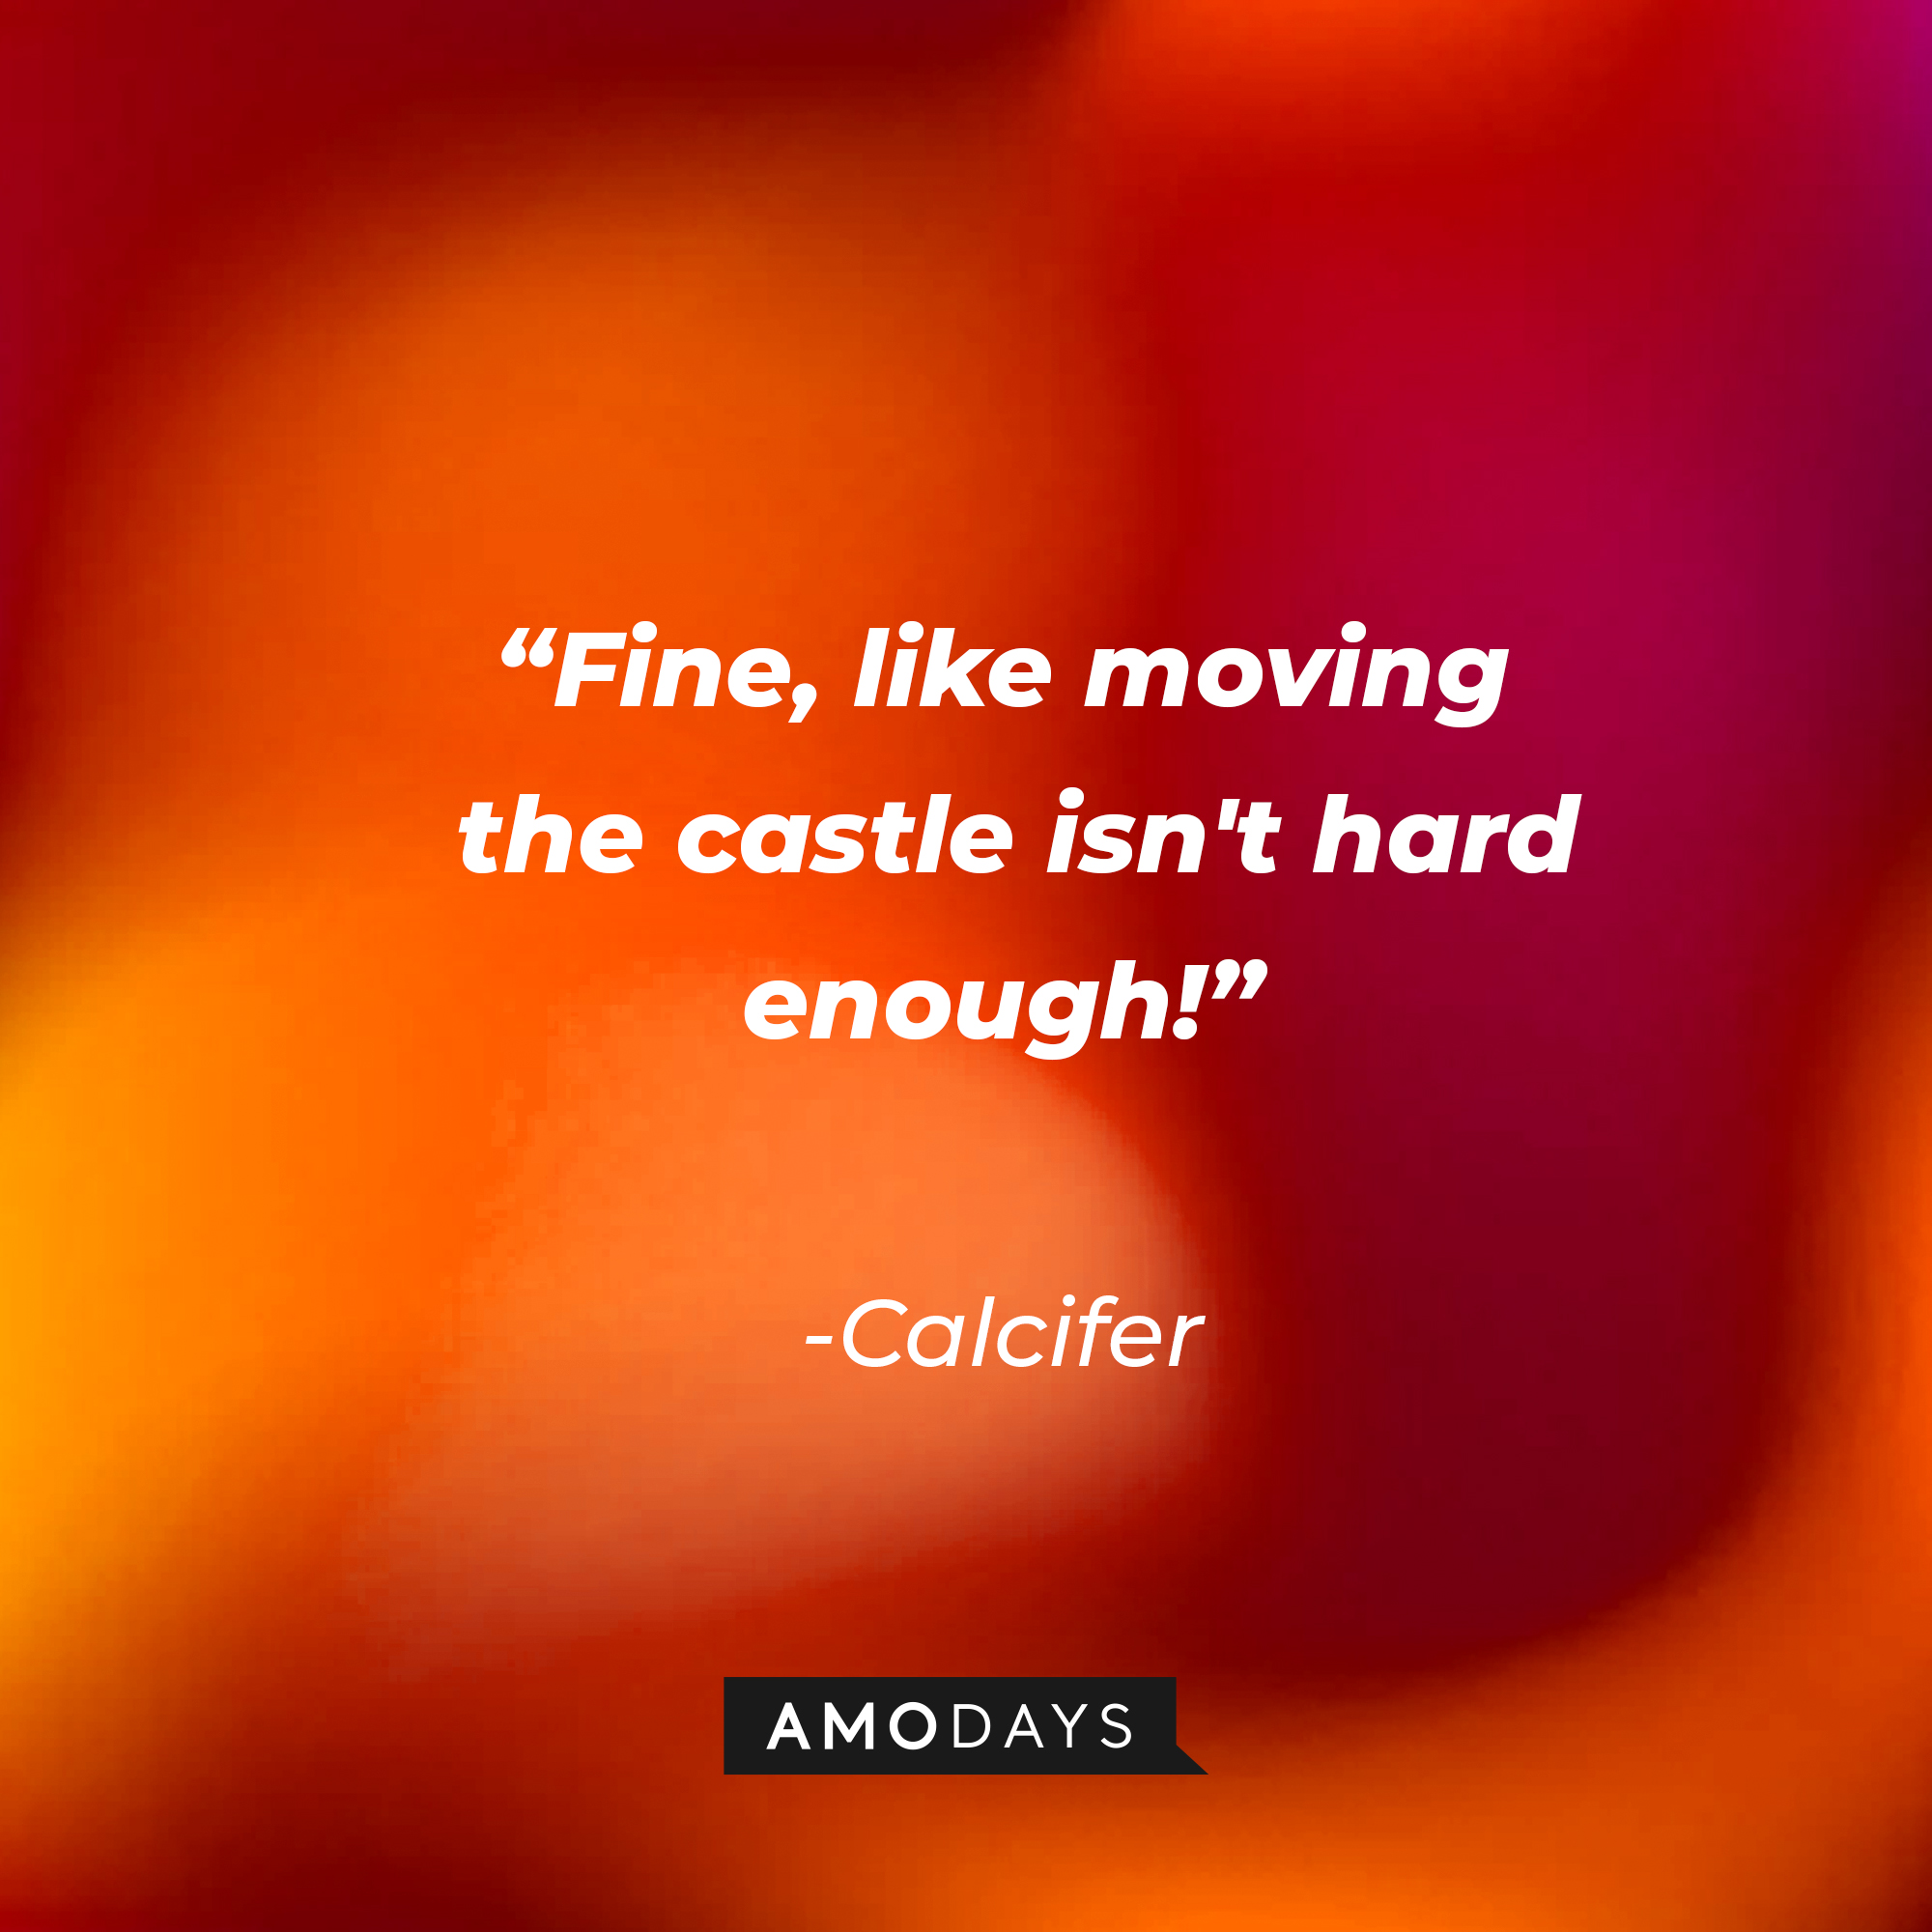 Calcifer’s quote: “Fine, like moving the castle isn't hard enough!” | Source: AmoDays